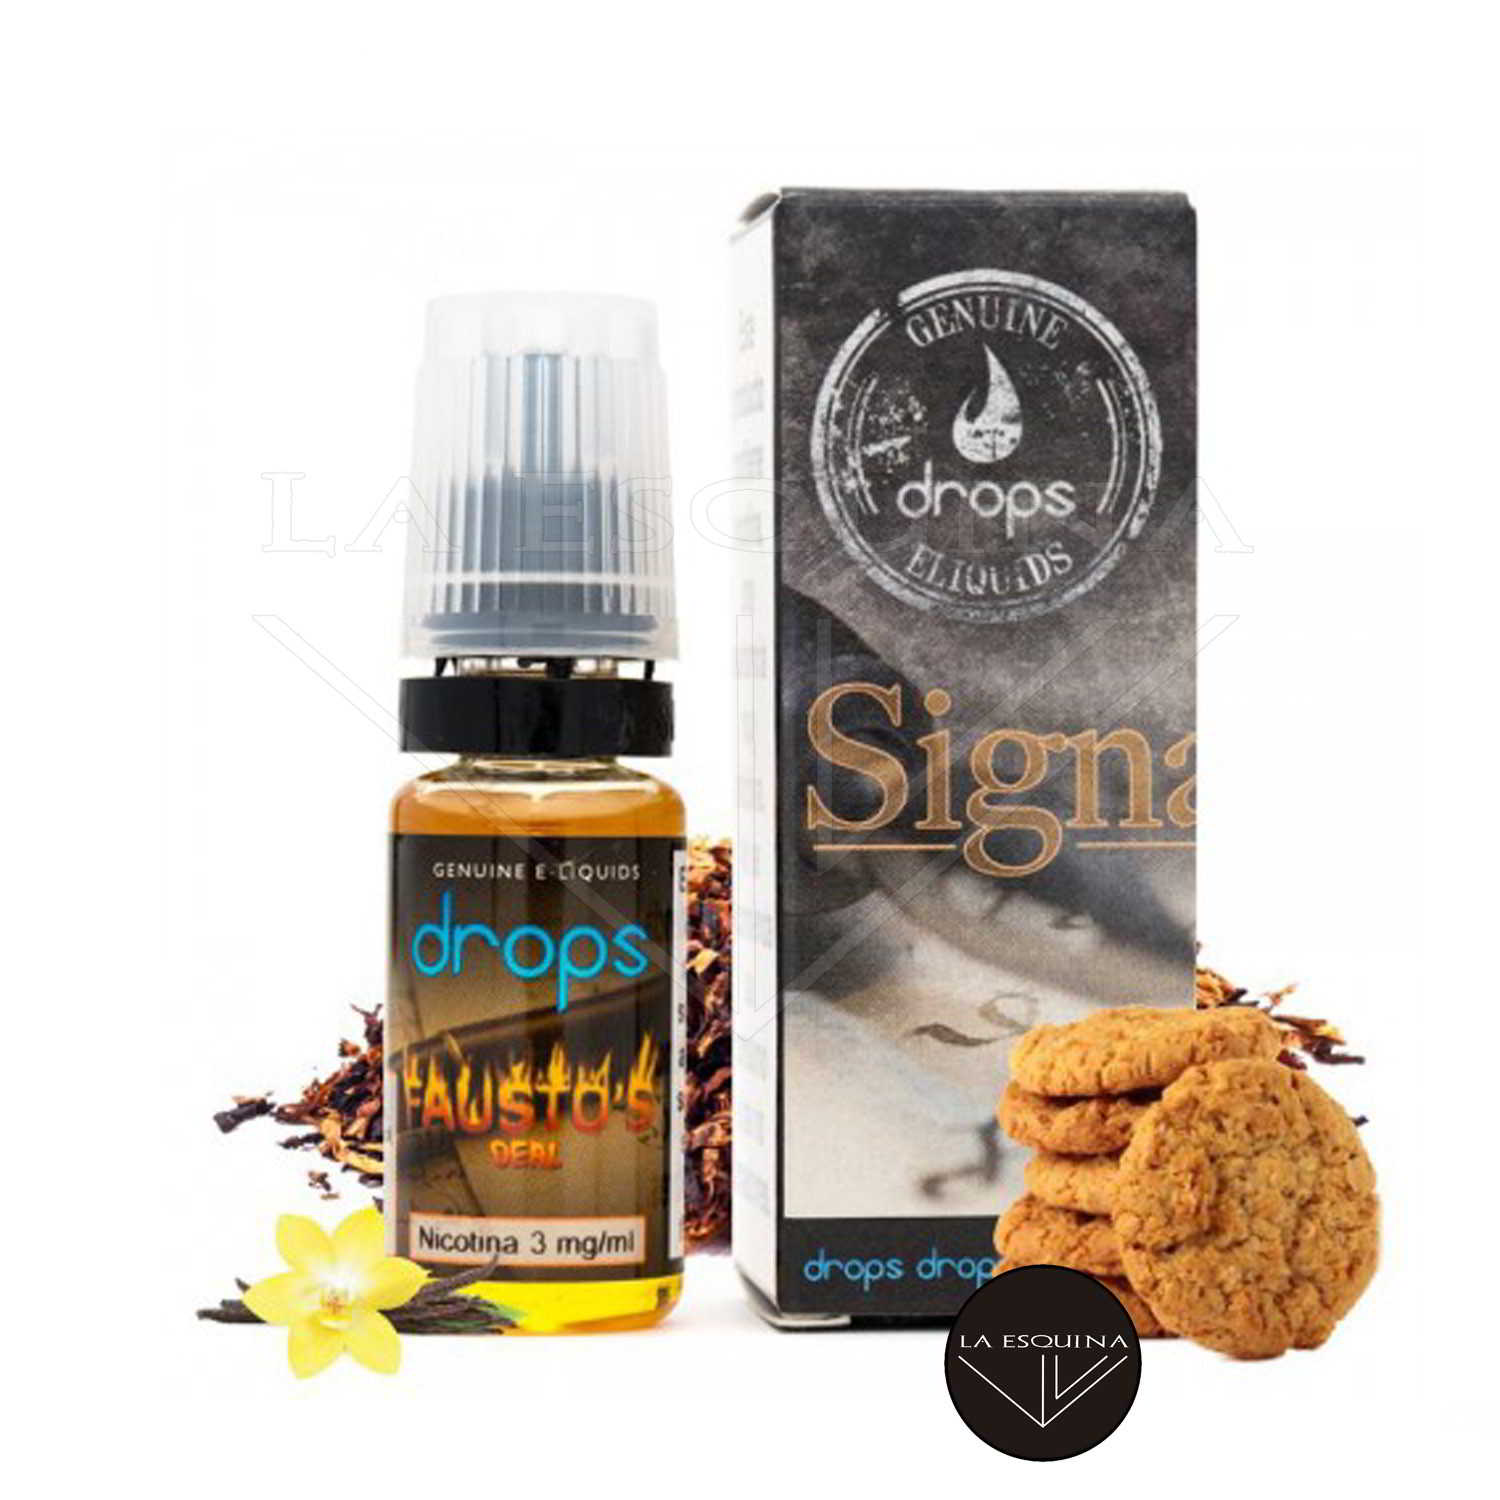 DROPS Fausto’s Deal 10 ml